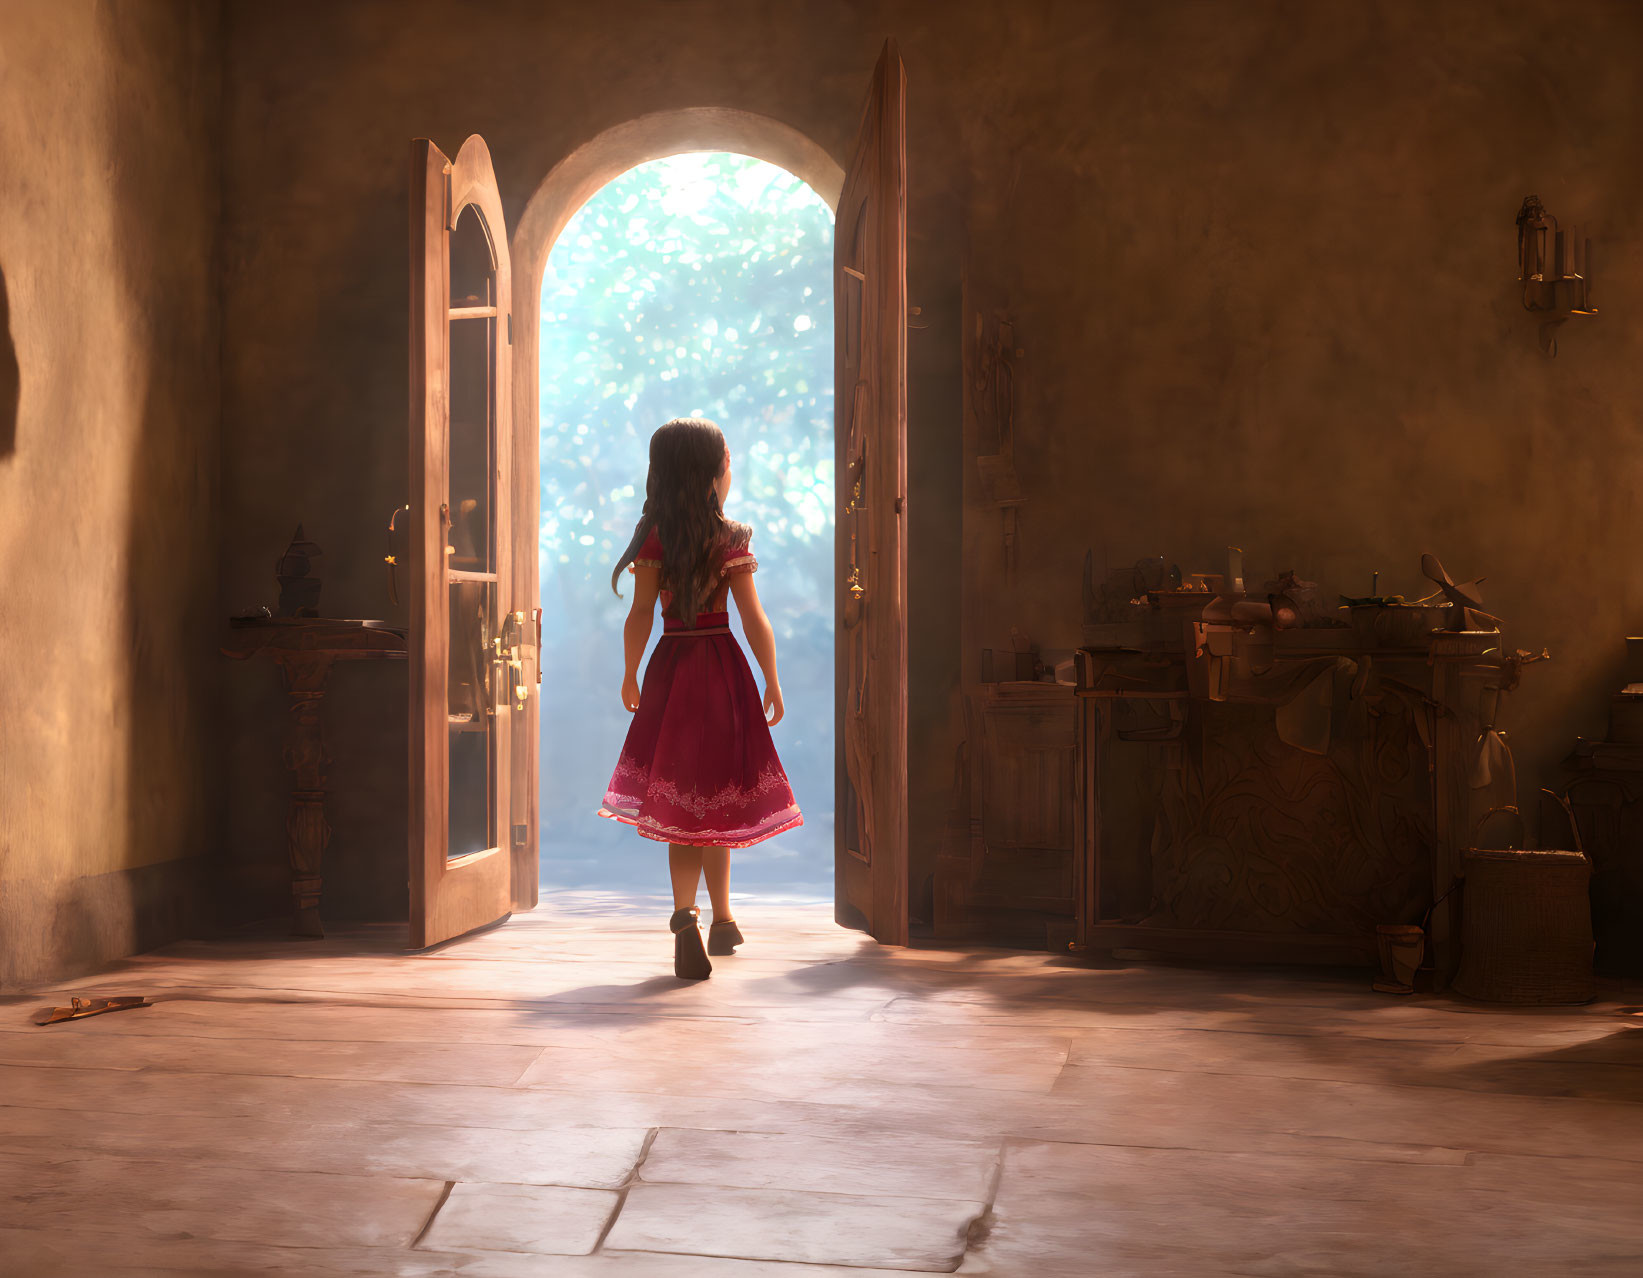 Young girl in red dress gazes out from warmly lit room.